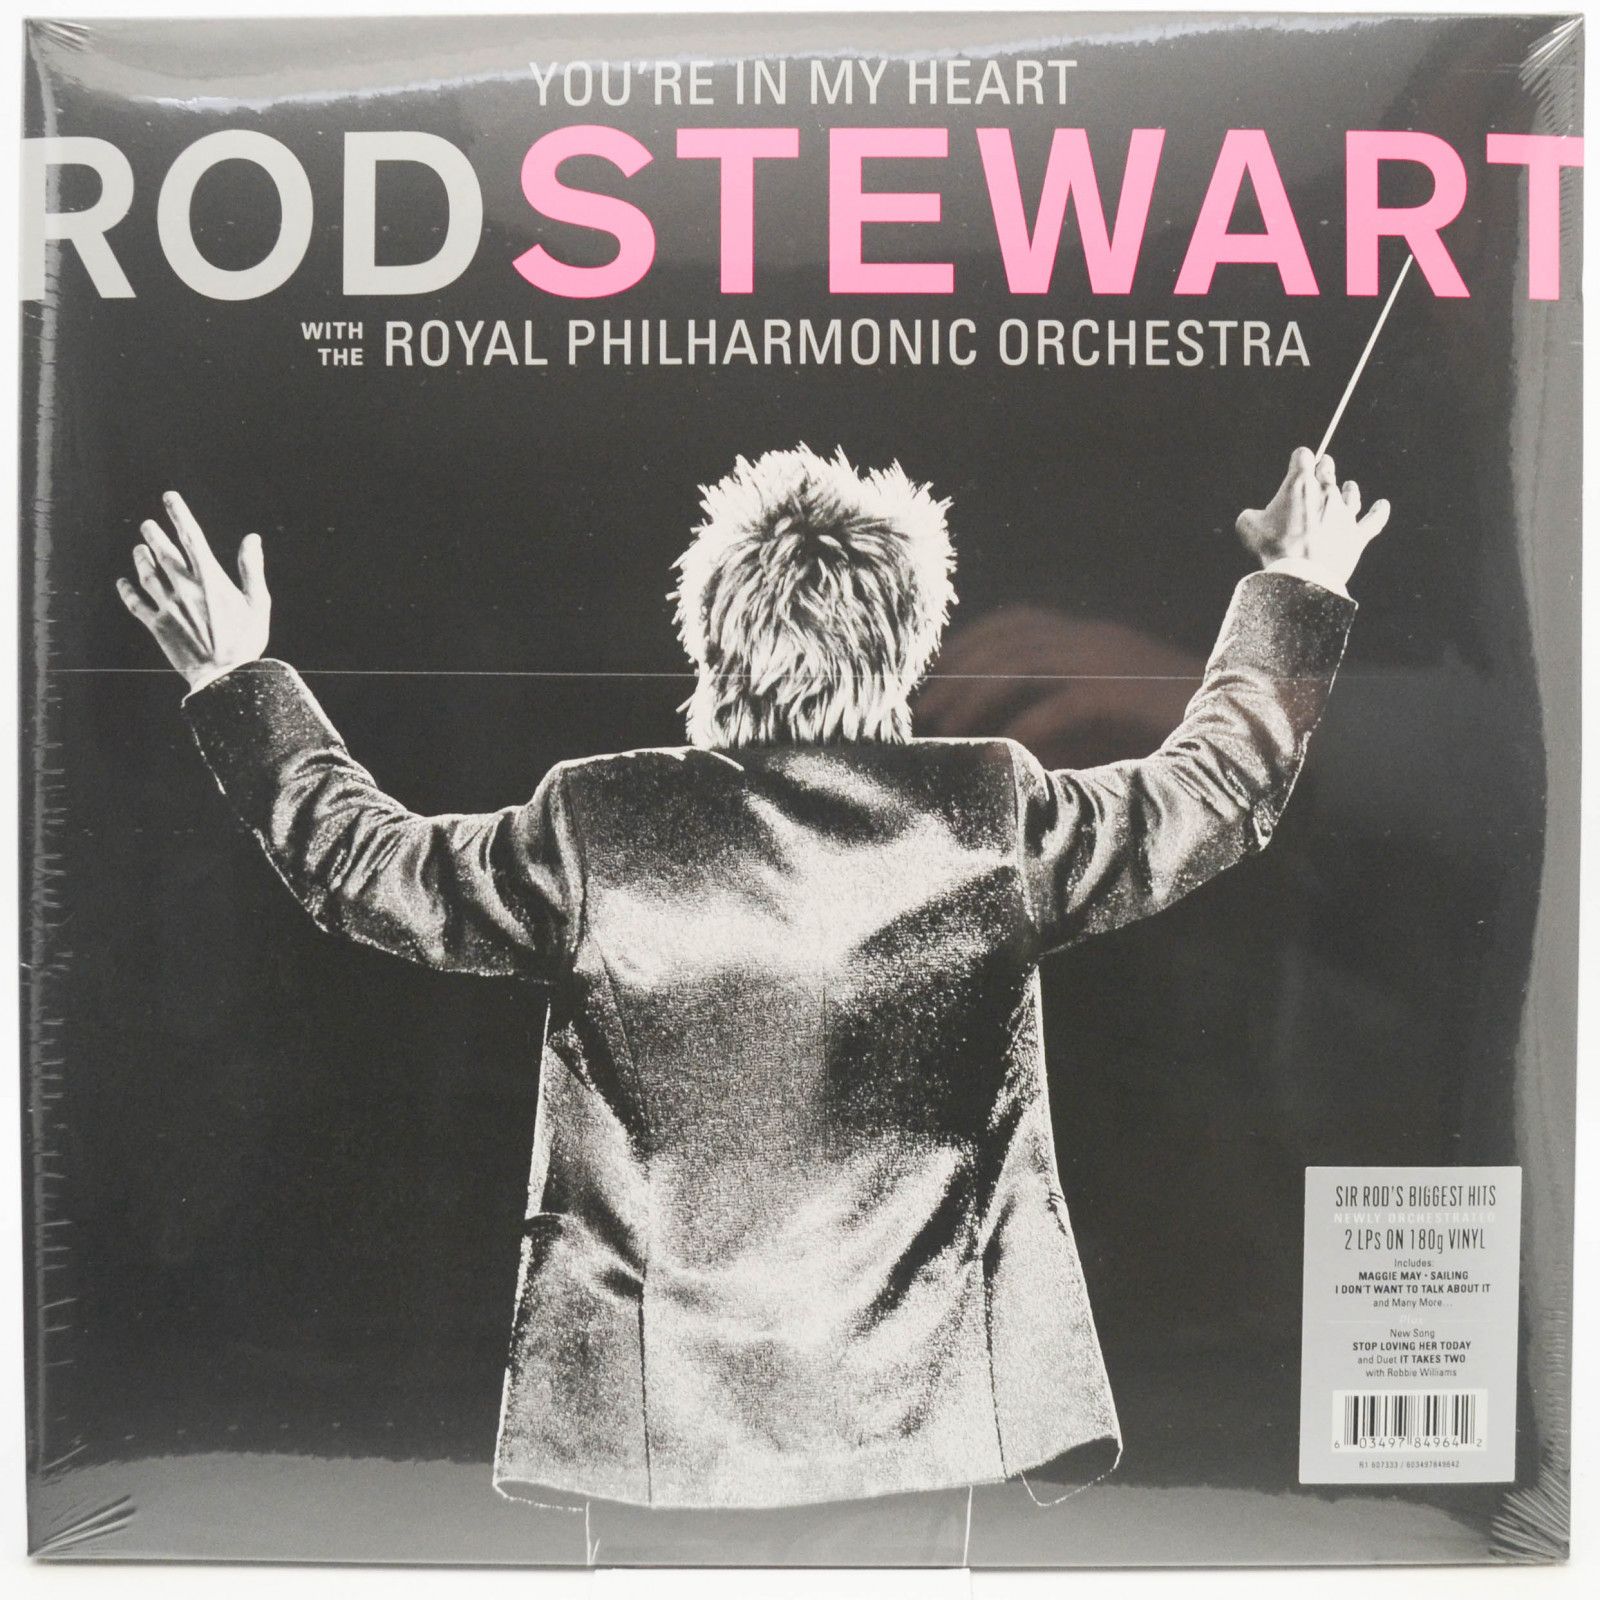 Rod Stewart With The Royal Philharmonic Orchestra — You're In My Heart (2LP), 2020